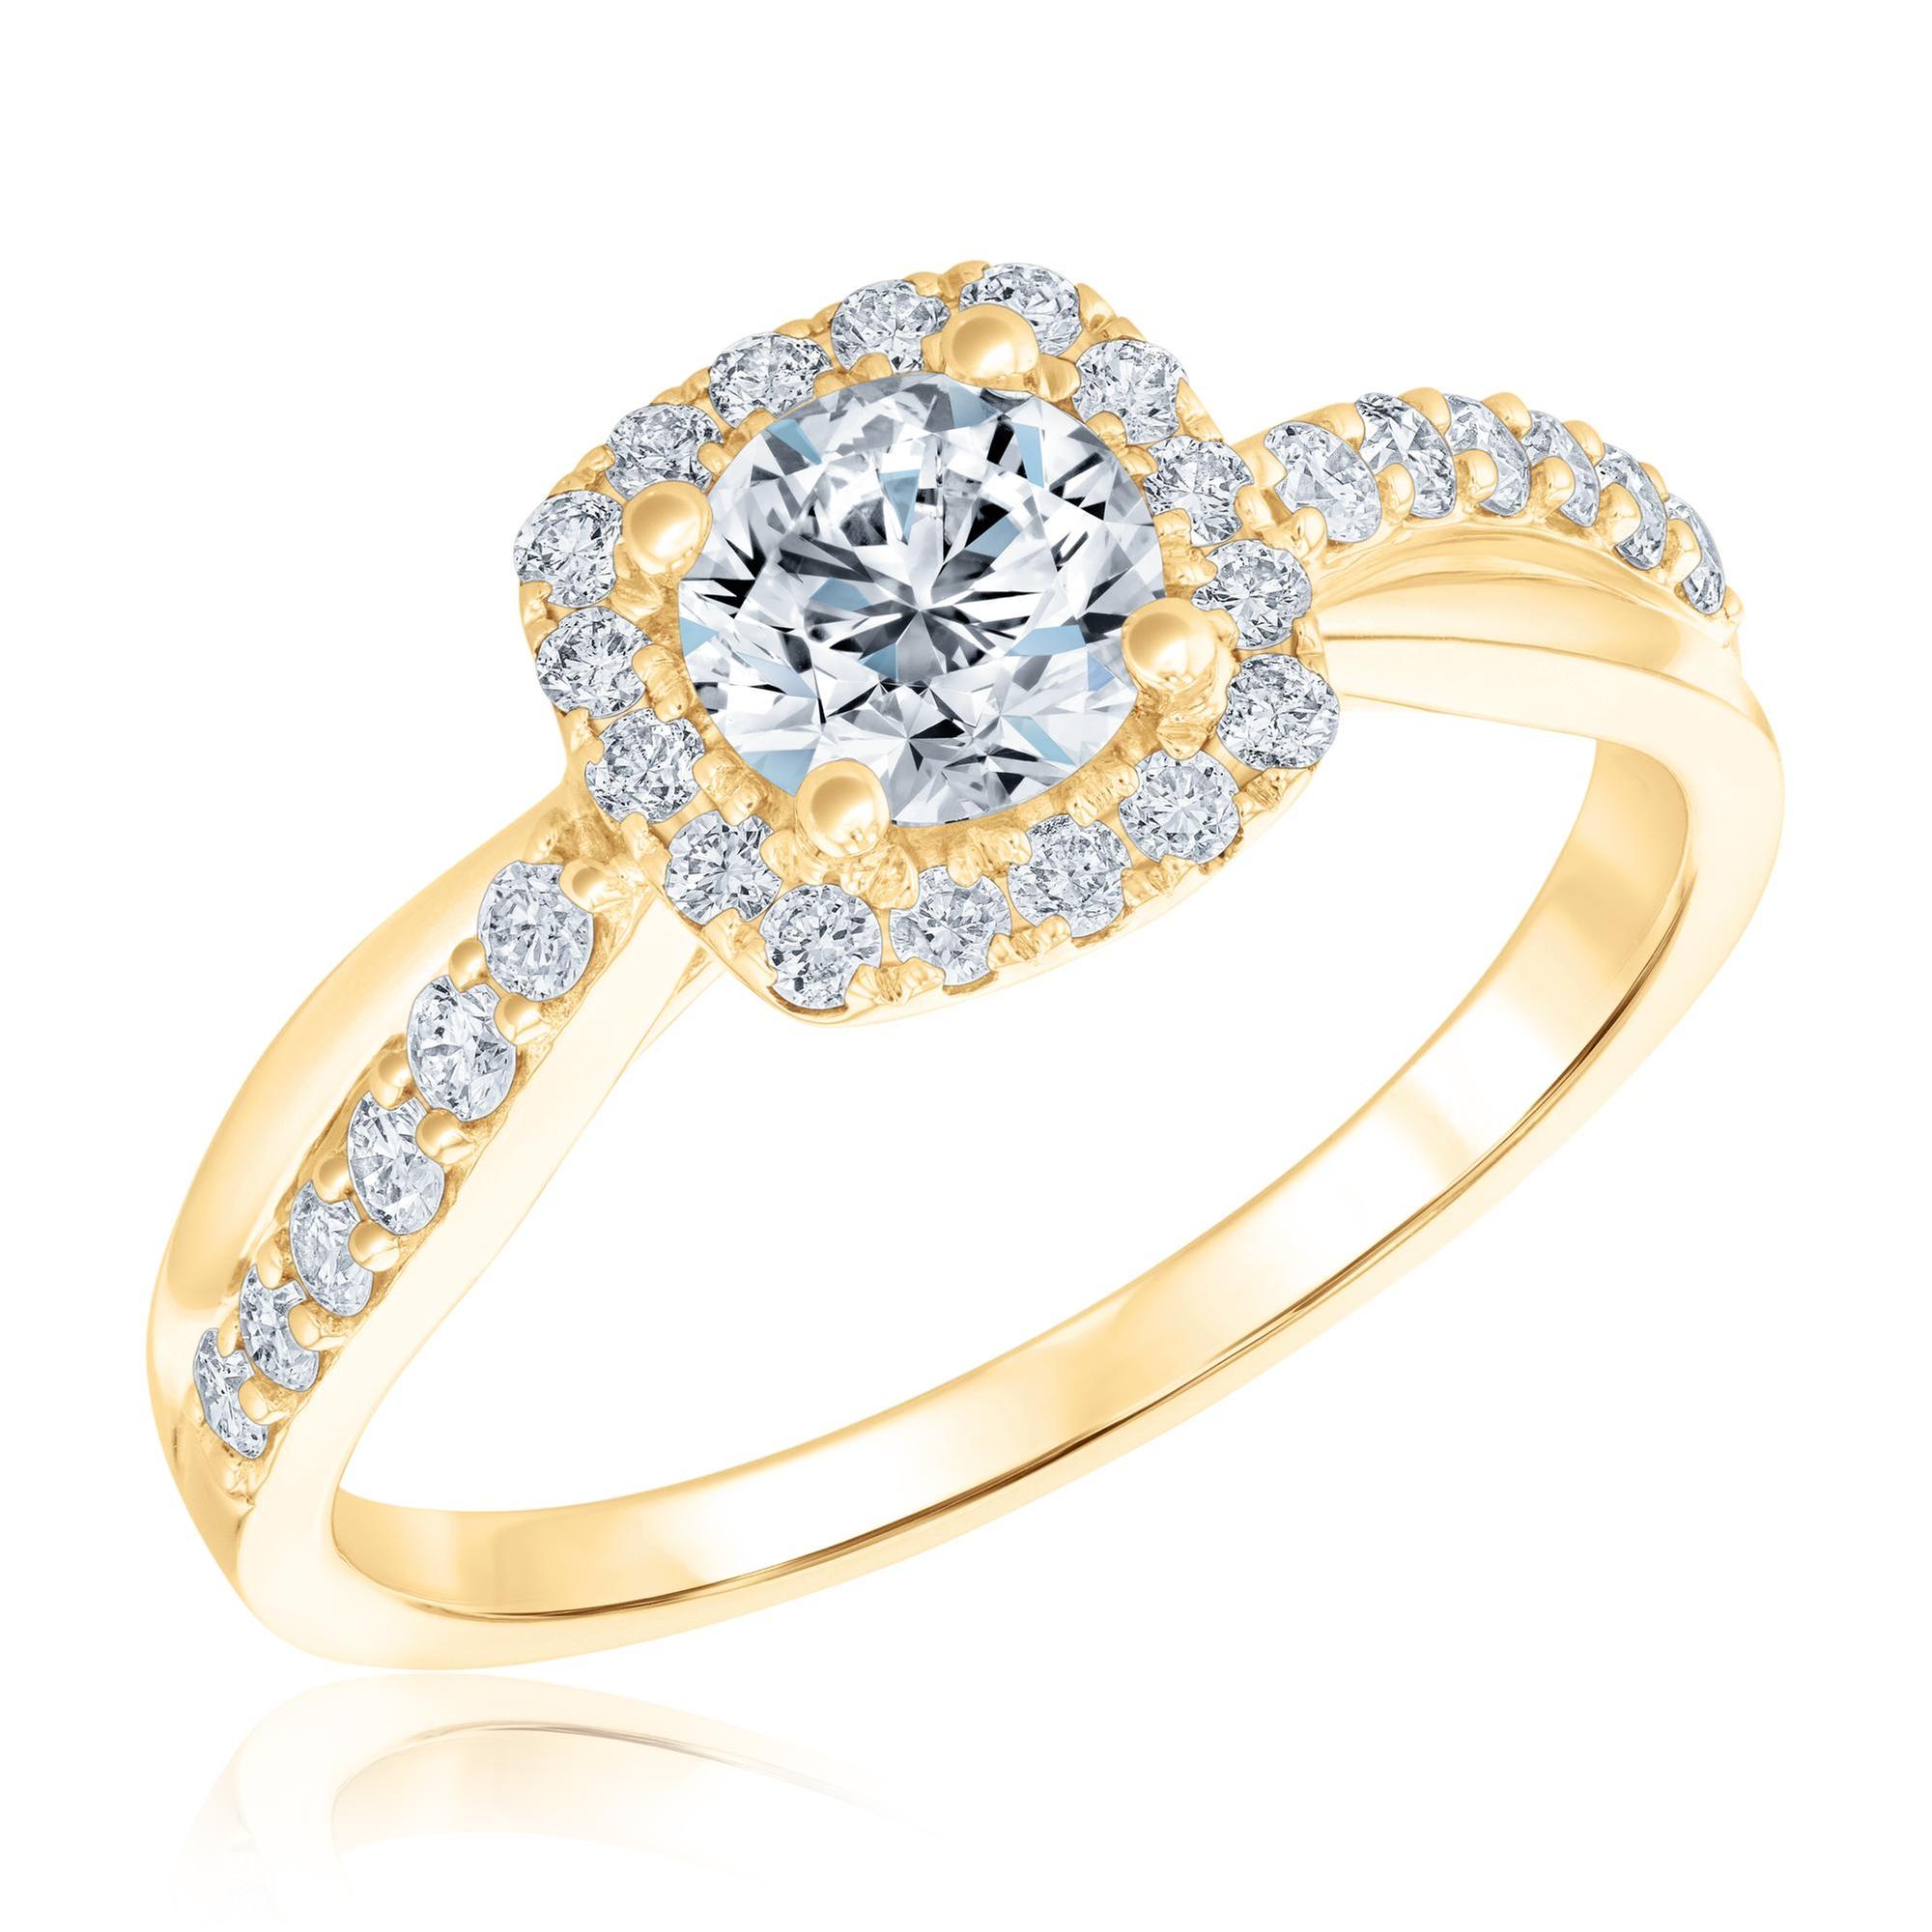 Details about   2.0 ct Cushion Cut Yellow Stone Wedding Bridal Promise Ring 14k White Gold 